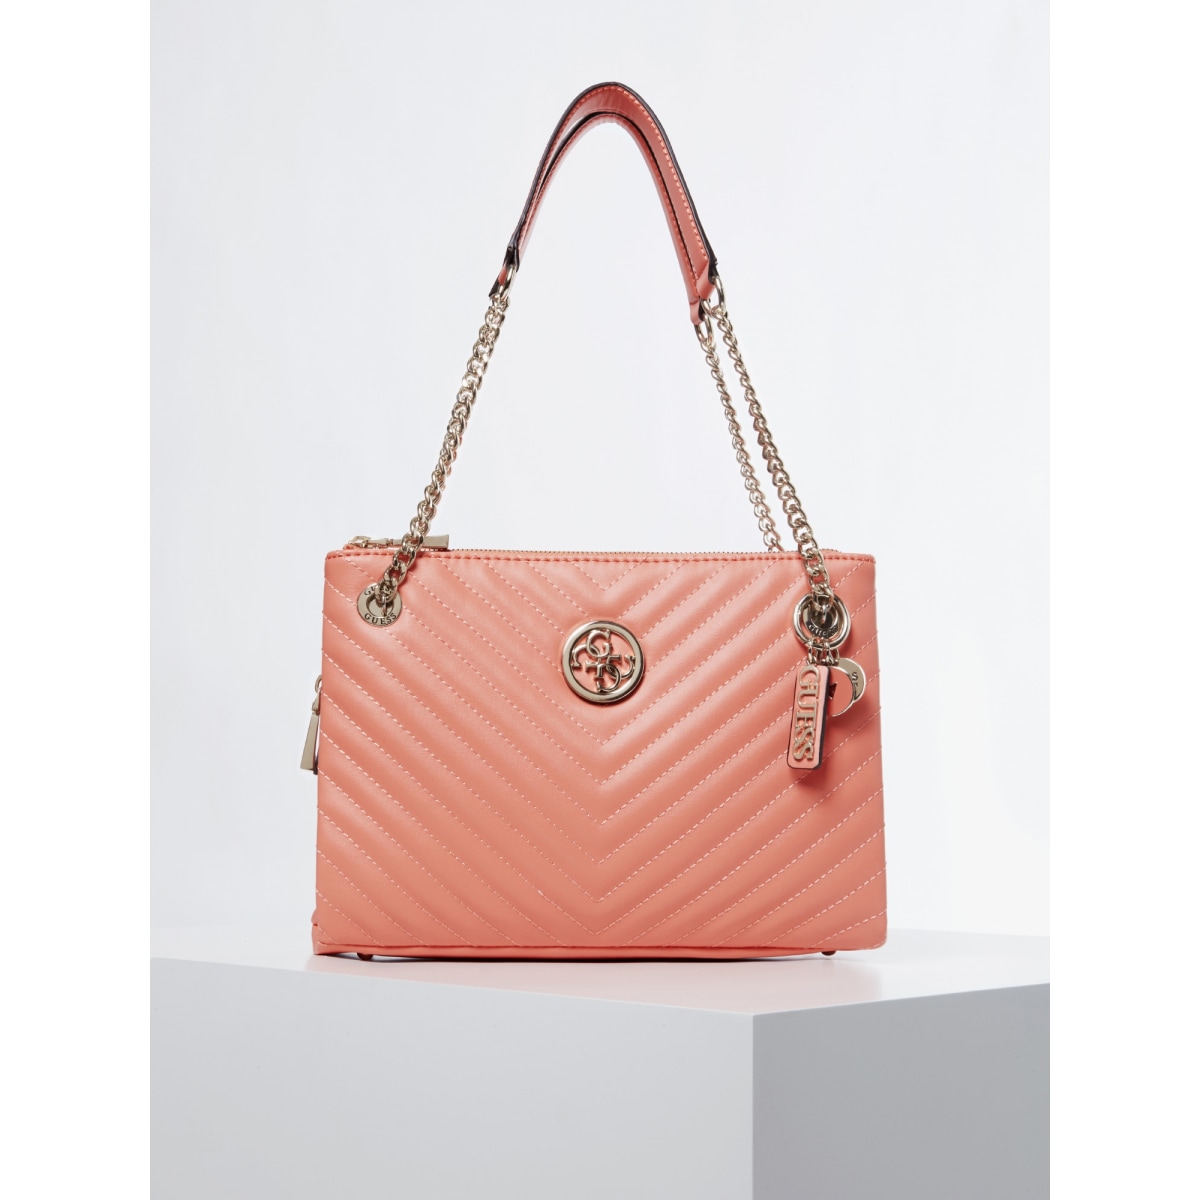 Guess Coral Women's Blakely Status Luxe Satchel